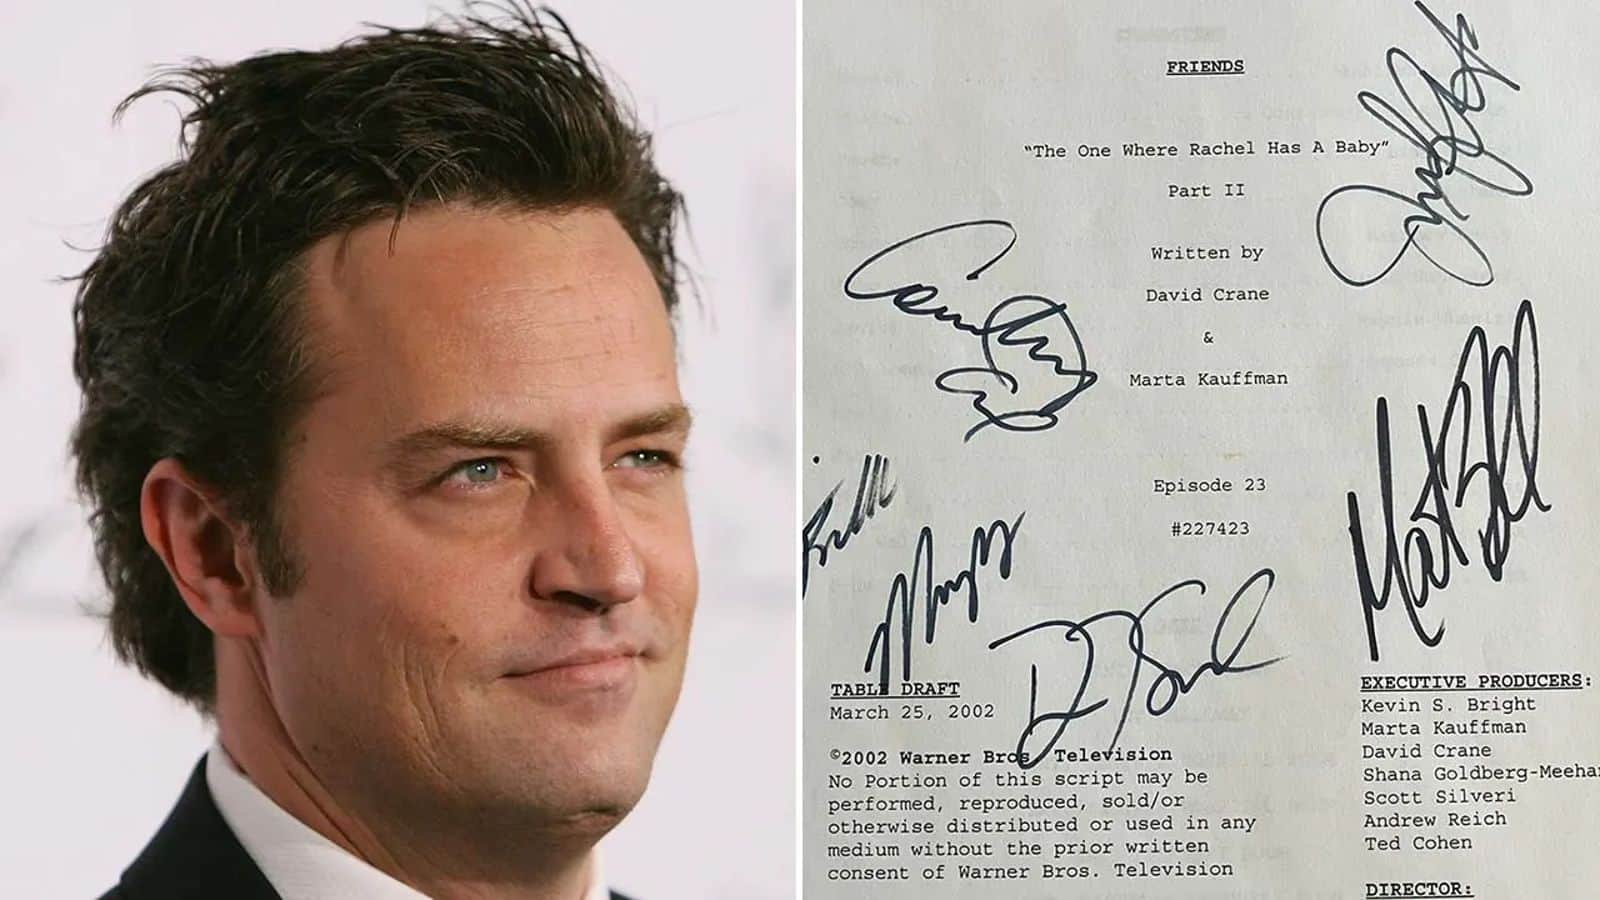 'F.R.I.E.N.D.S' script gets auctioned; proceeds to benefit Matthew Perry Foundation